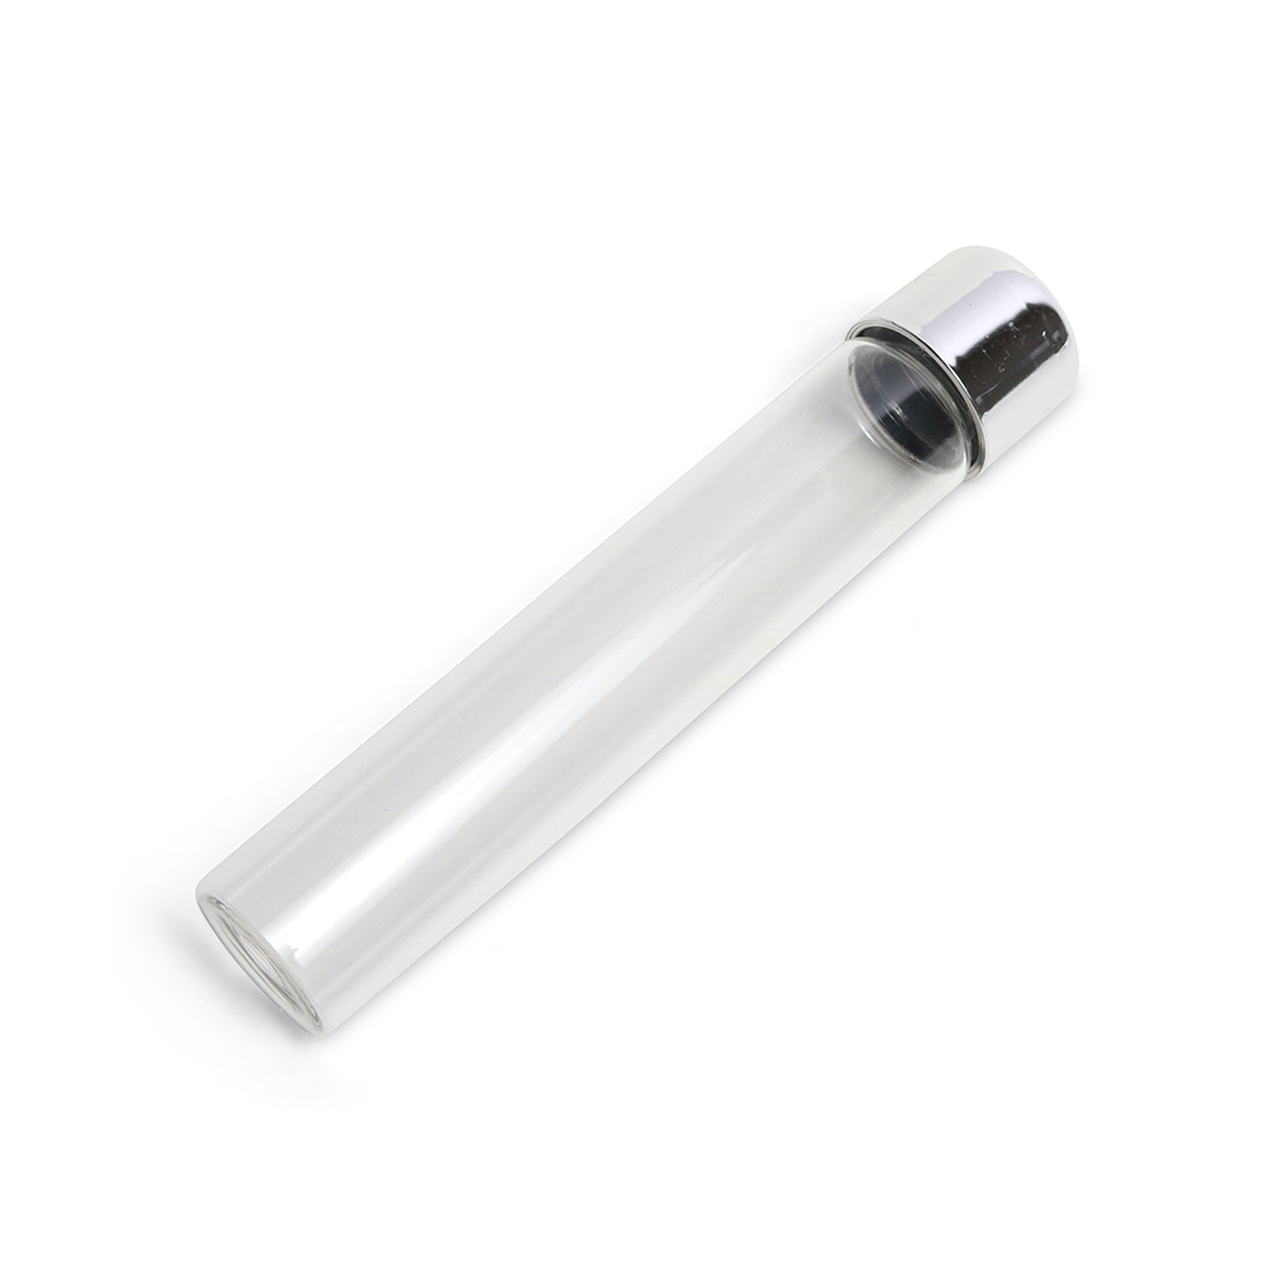 115mm Glass Pre-Roll Tubes with Child-Proof Silver Cap (400 tubes